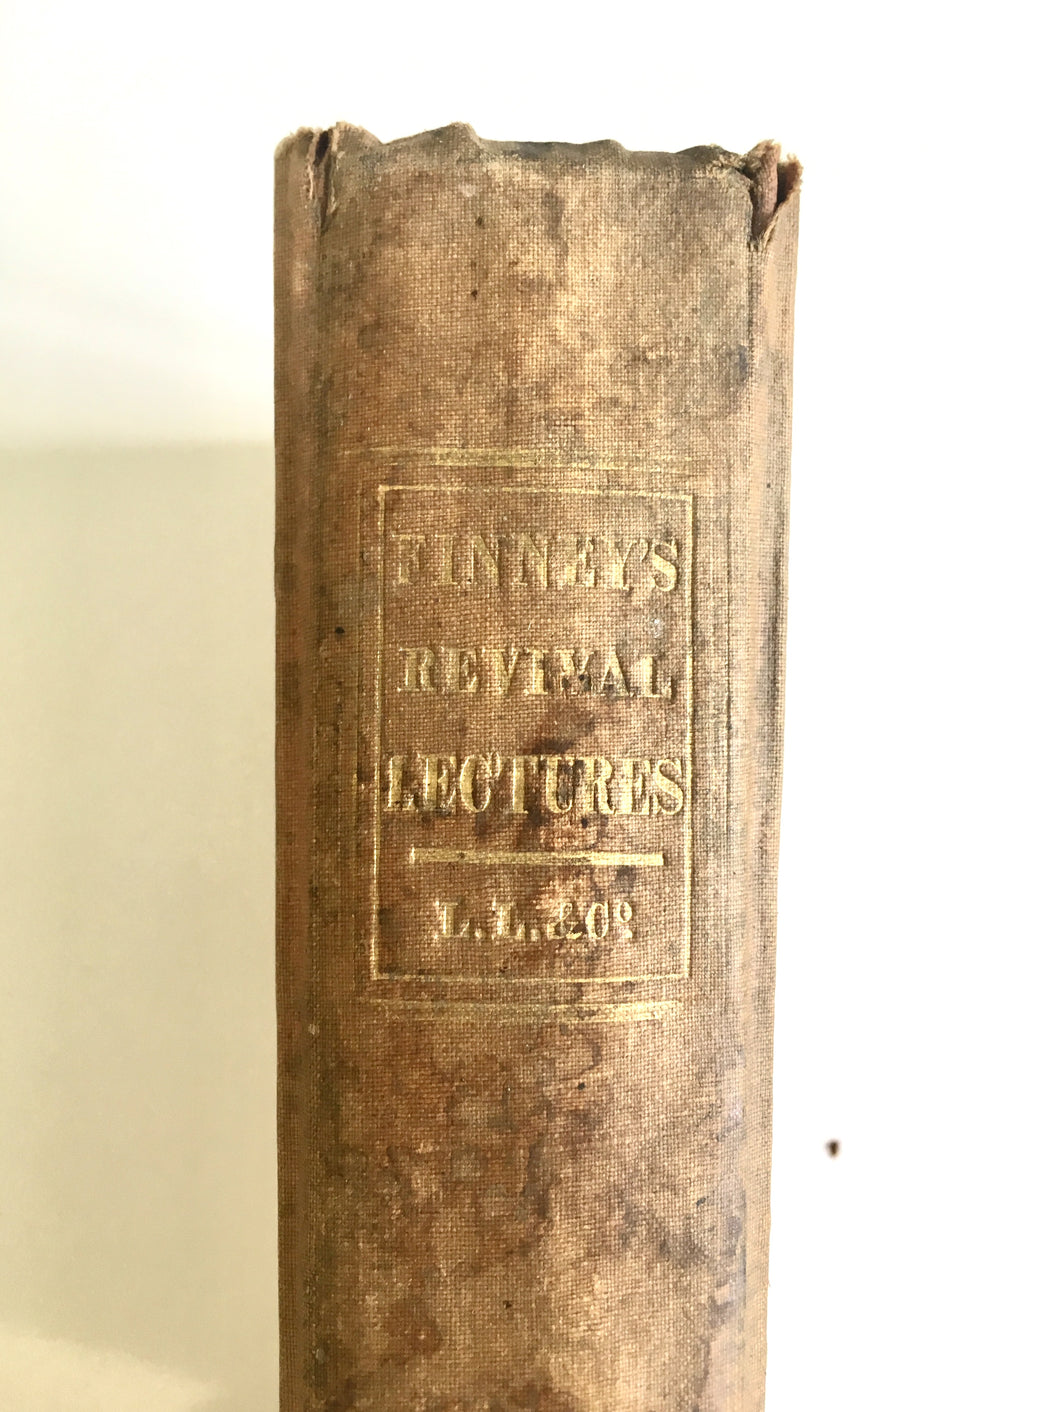 1835 CHARLES G. FINNEY. Lectures on Revivals of Religion. True First Edition, First Printing